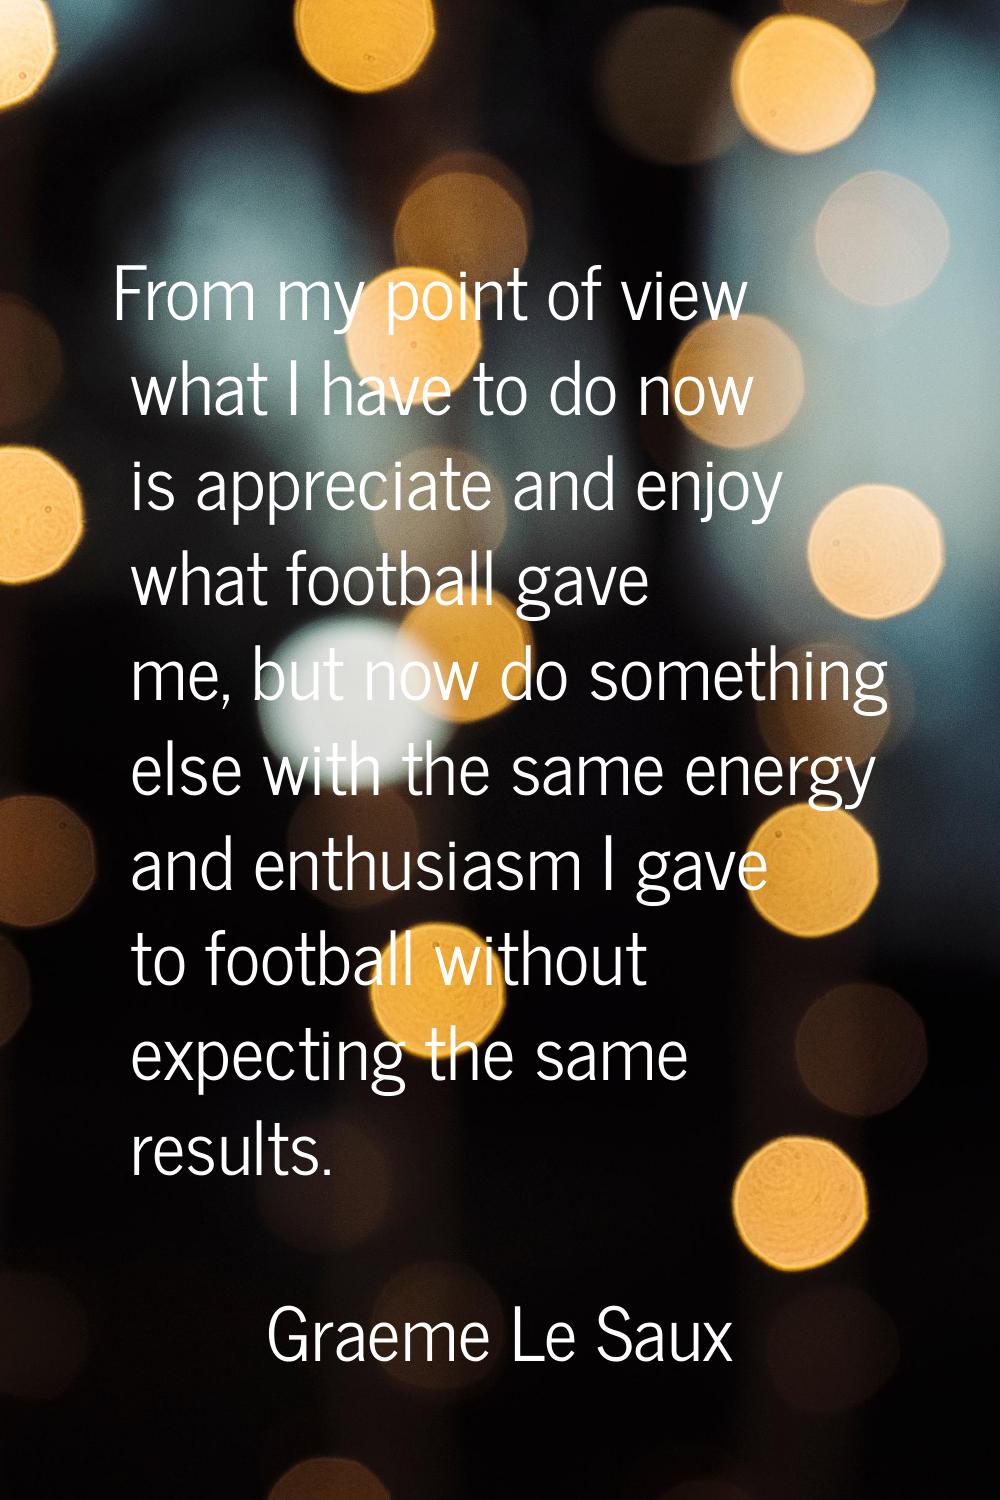 From my point of view what I have to do now is appreciate and enjoy what football gave me, but now 